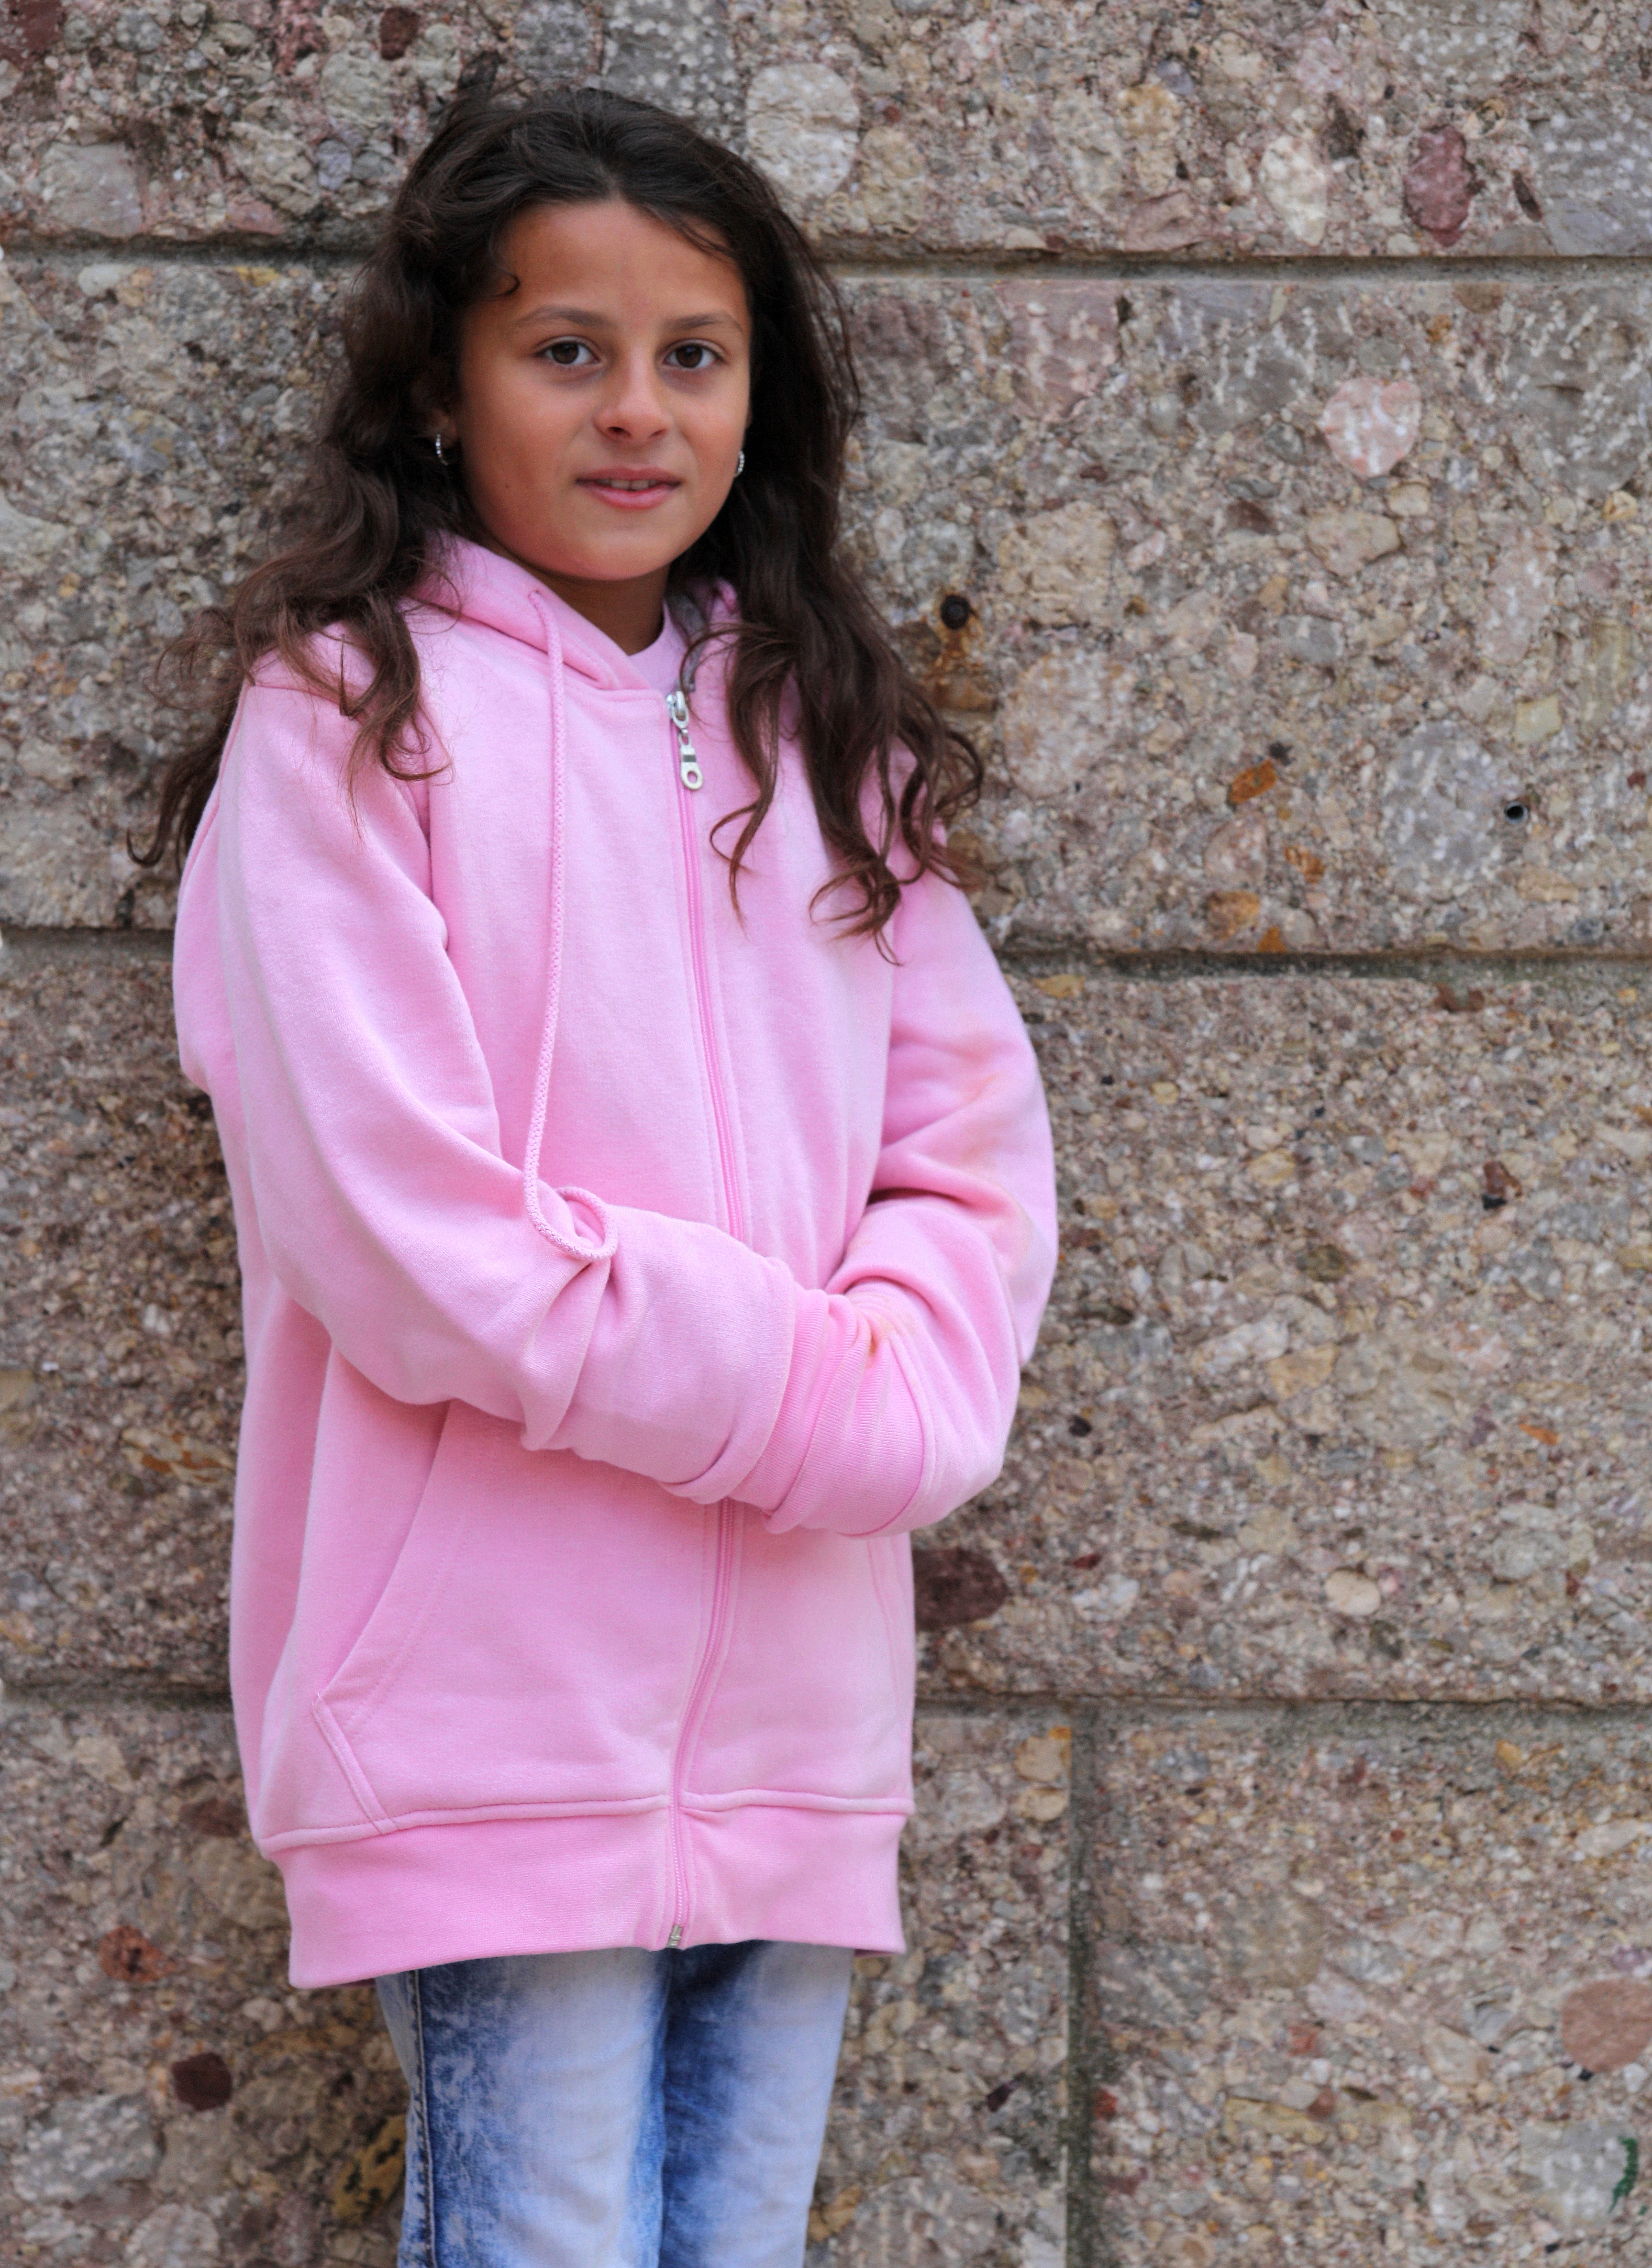 a child girl photographed in Montserrat, Spain, in August 2013, picture 3/4